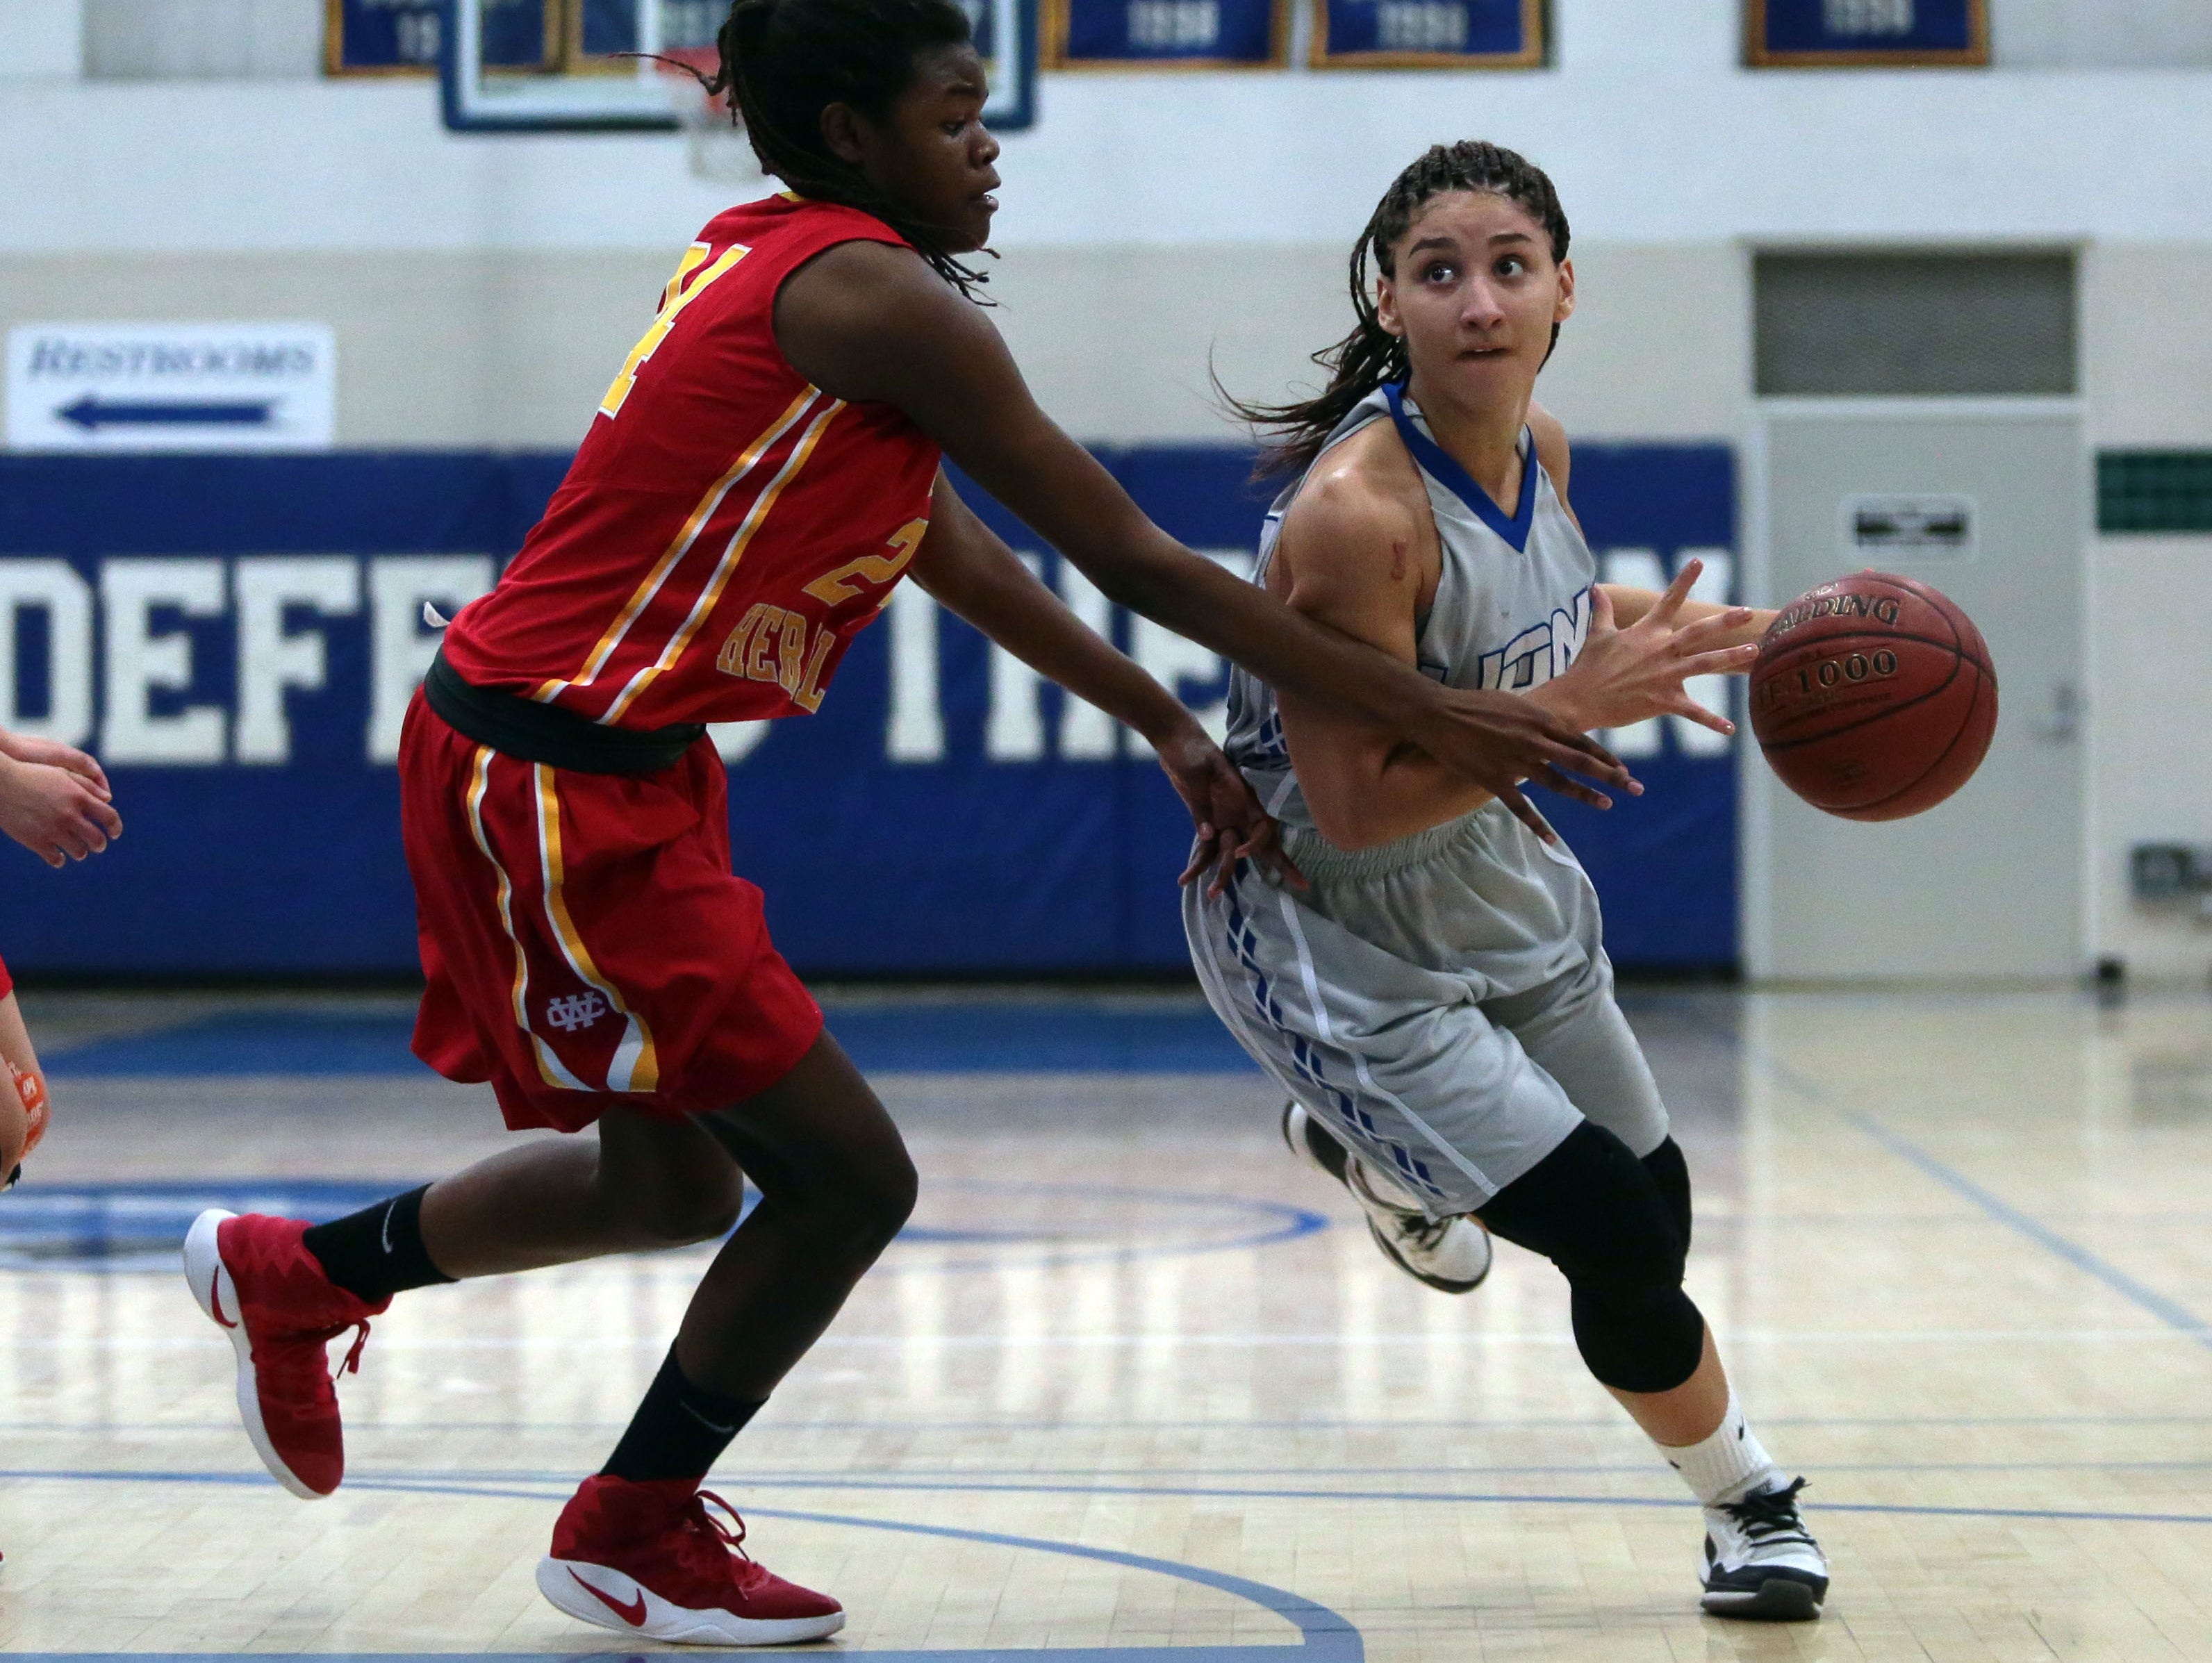 Cathedral City's Le'Anna Broom moves pass Whittier Christian defenders on Saturday, February 18, 2017 in Cathedral City.